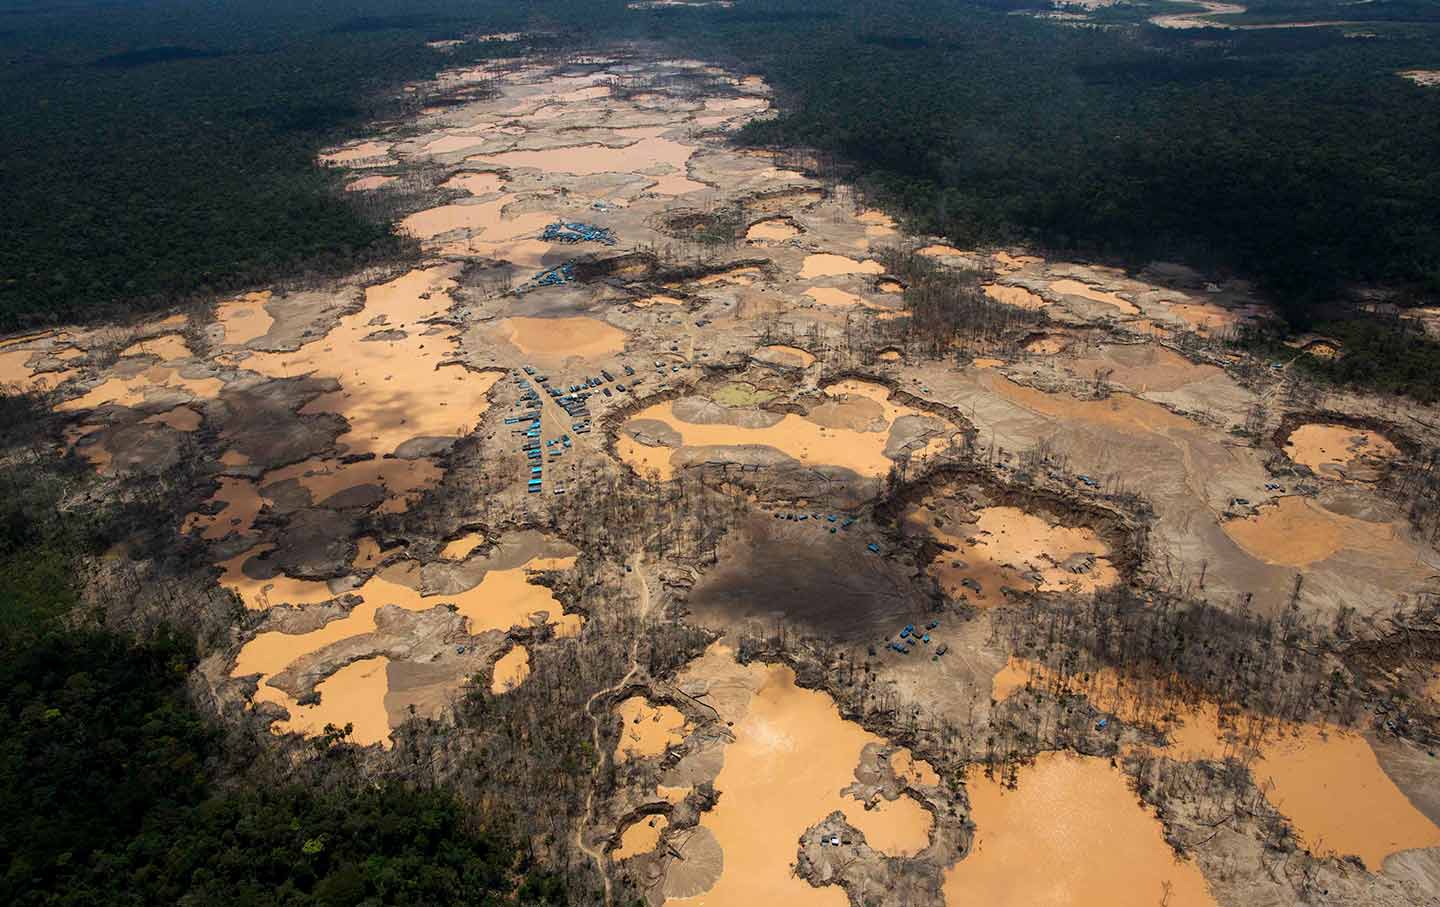 The Other Man-Made Disaster Ravaging the Amazon | The Nation